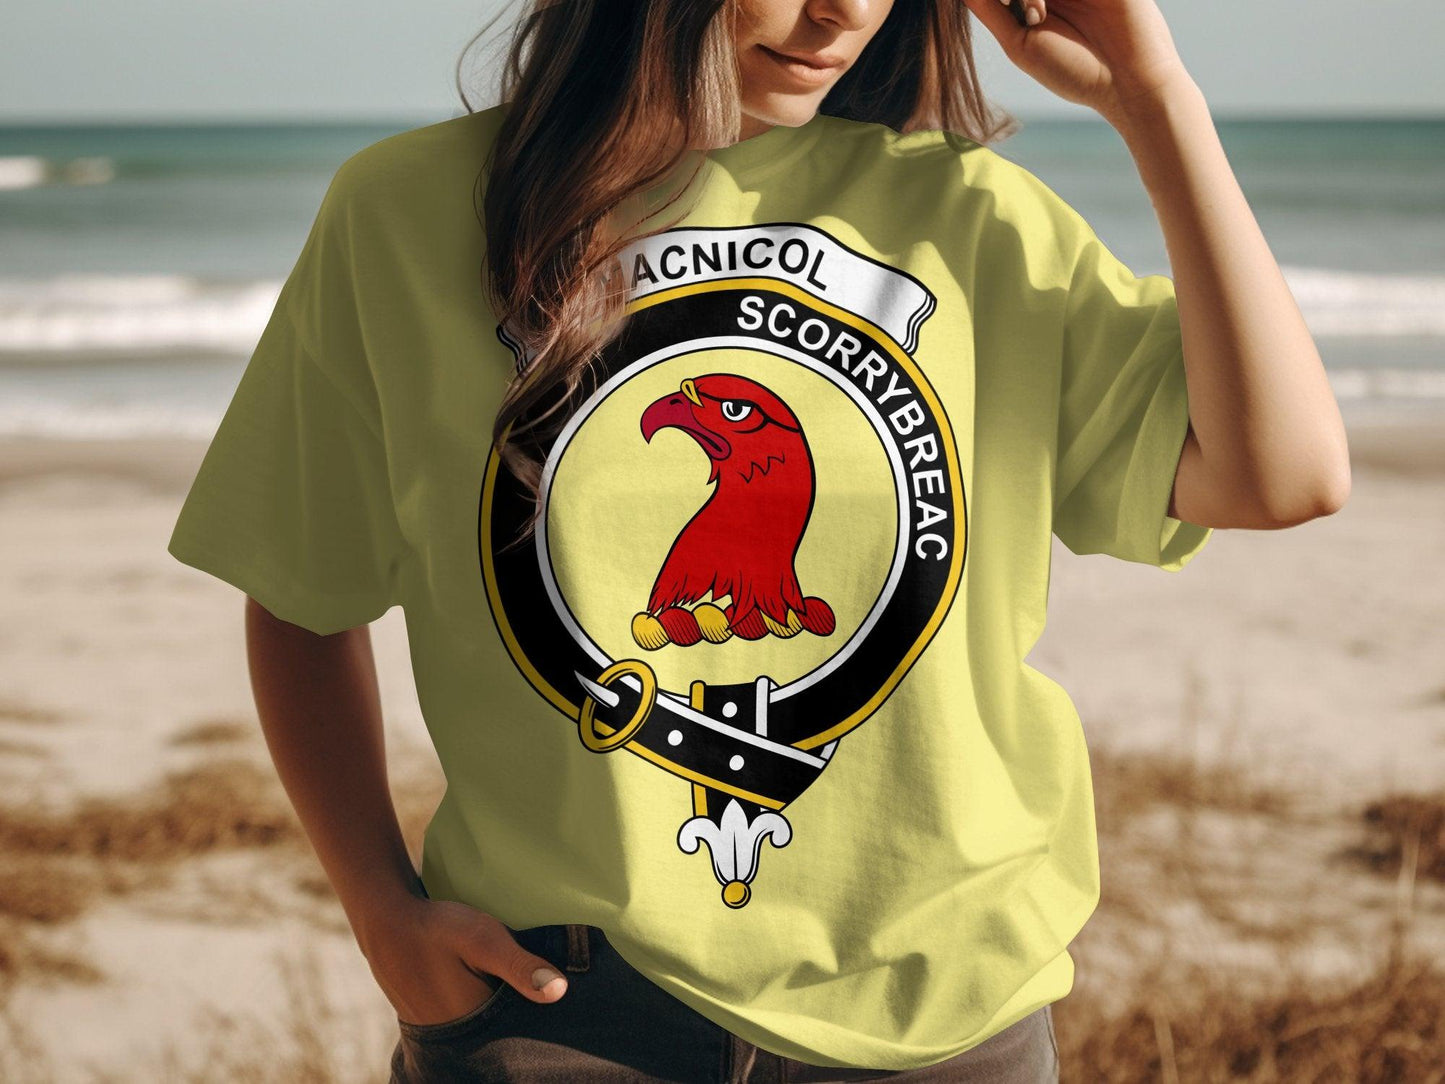 MacNicol Scorrybreac Clan Crest Highland Games T-Shirt - Living Stone Gifts